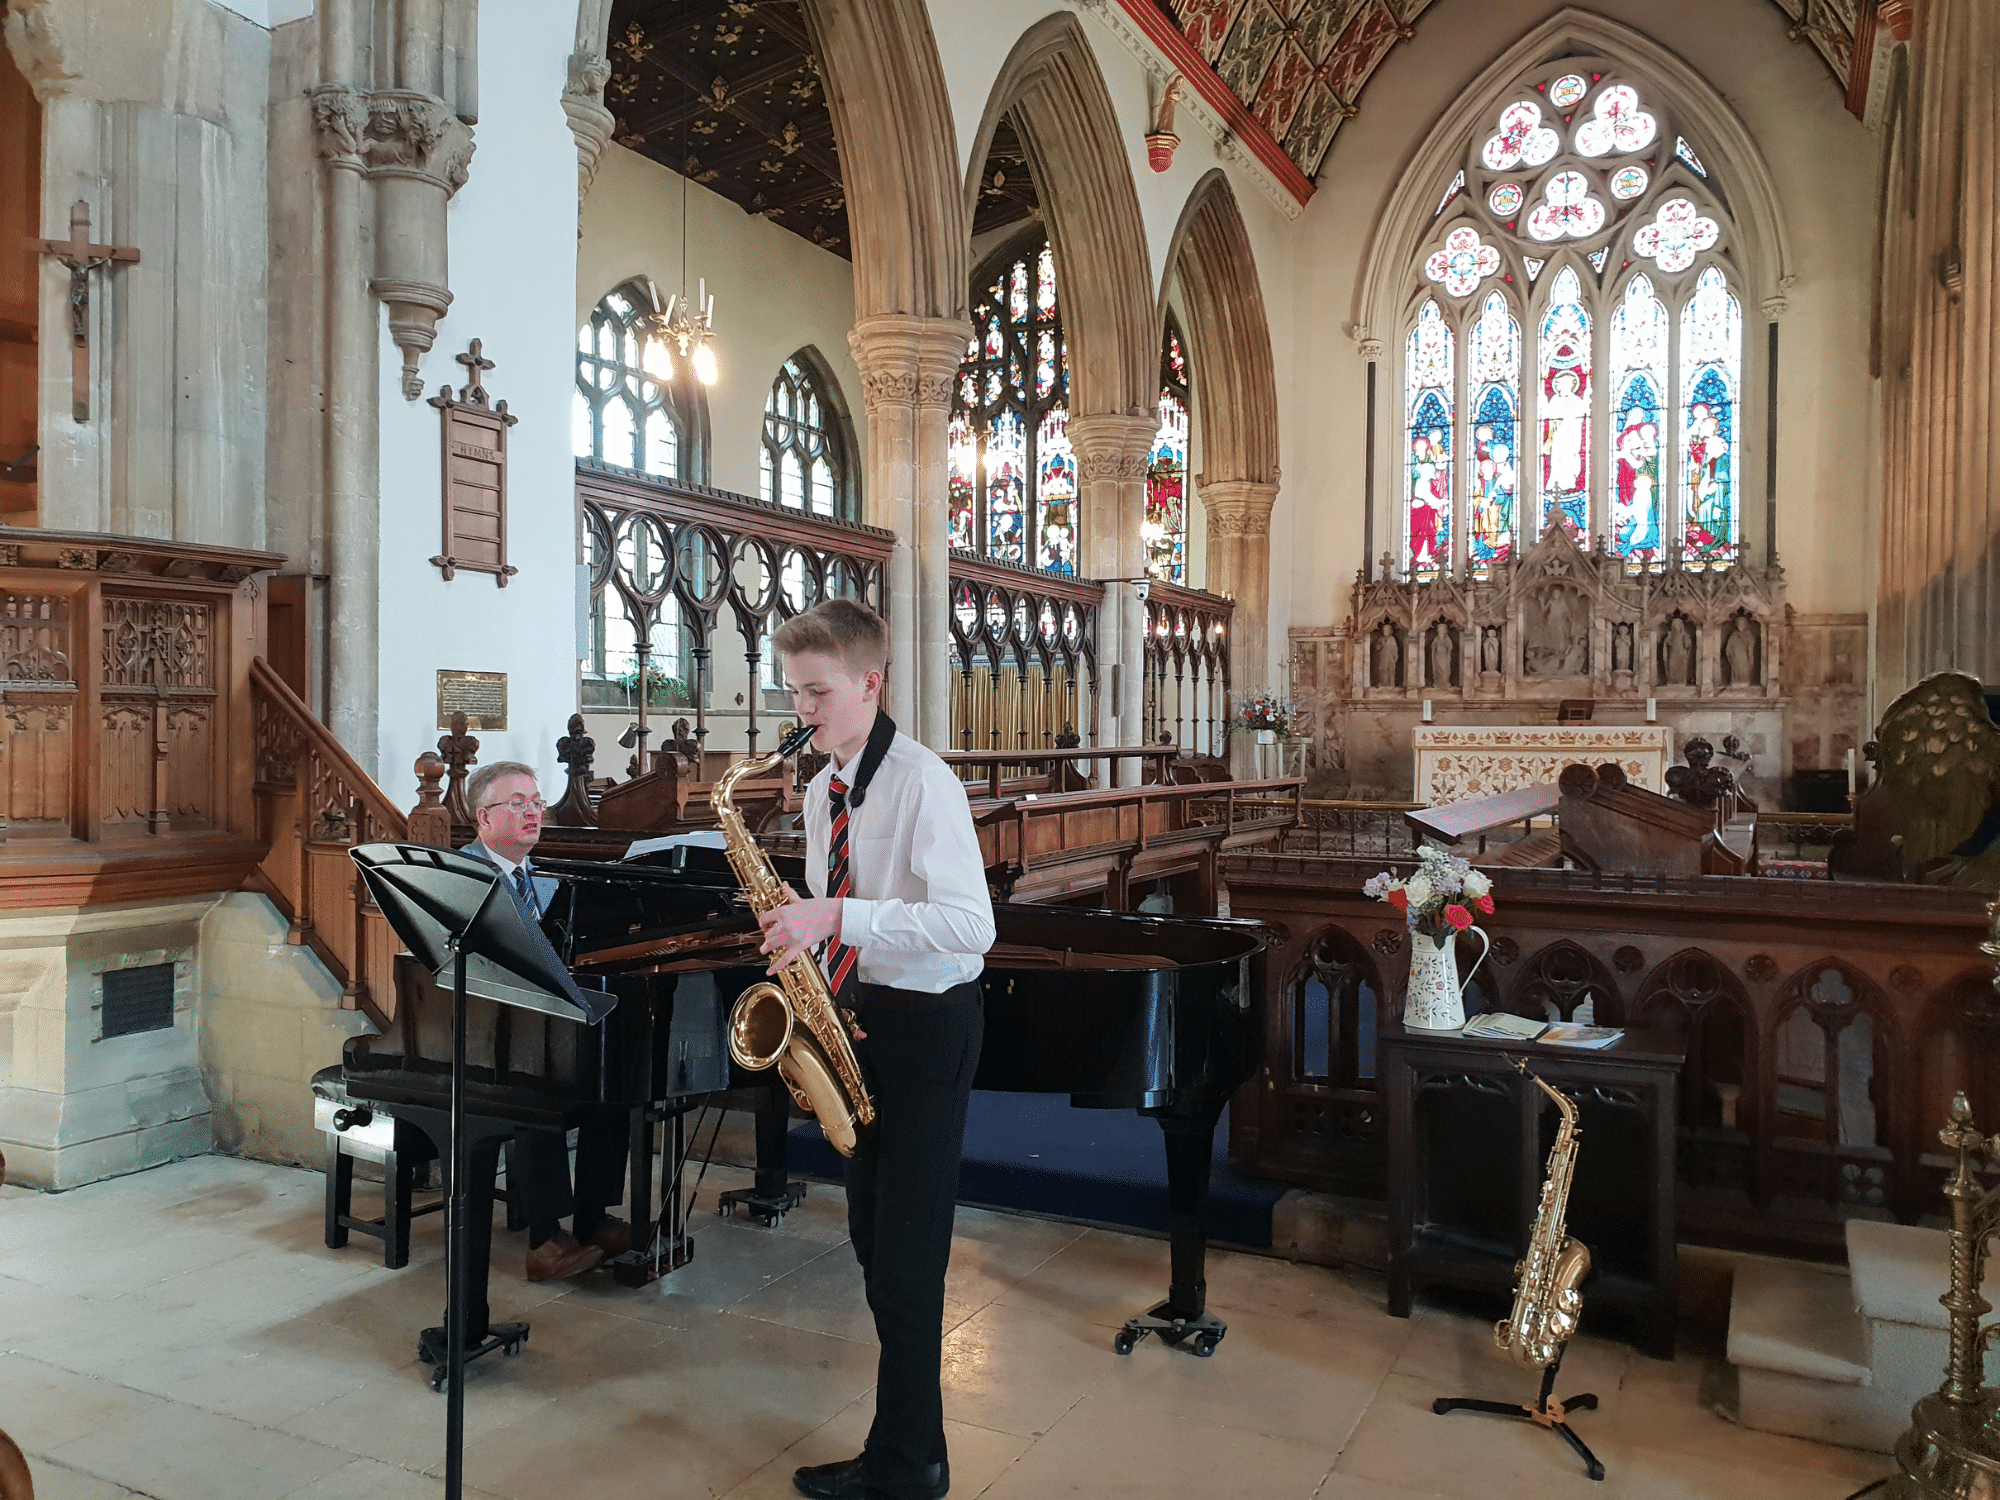 Student plays tenor sax in concert in church